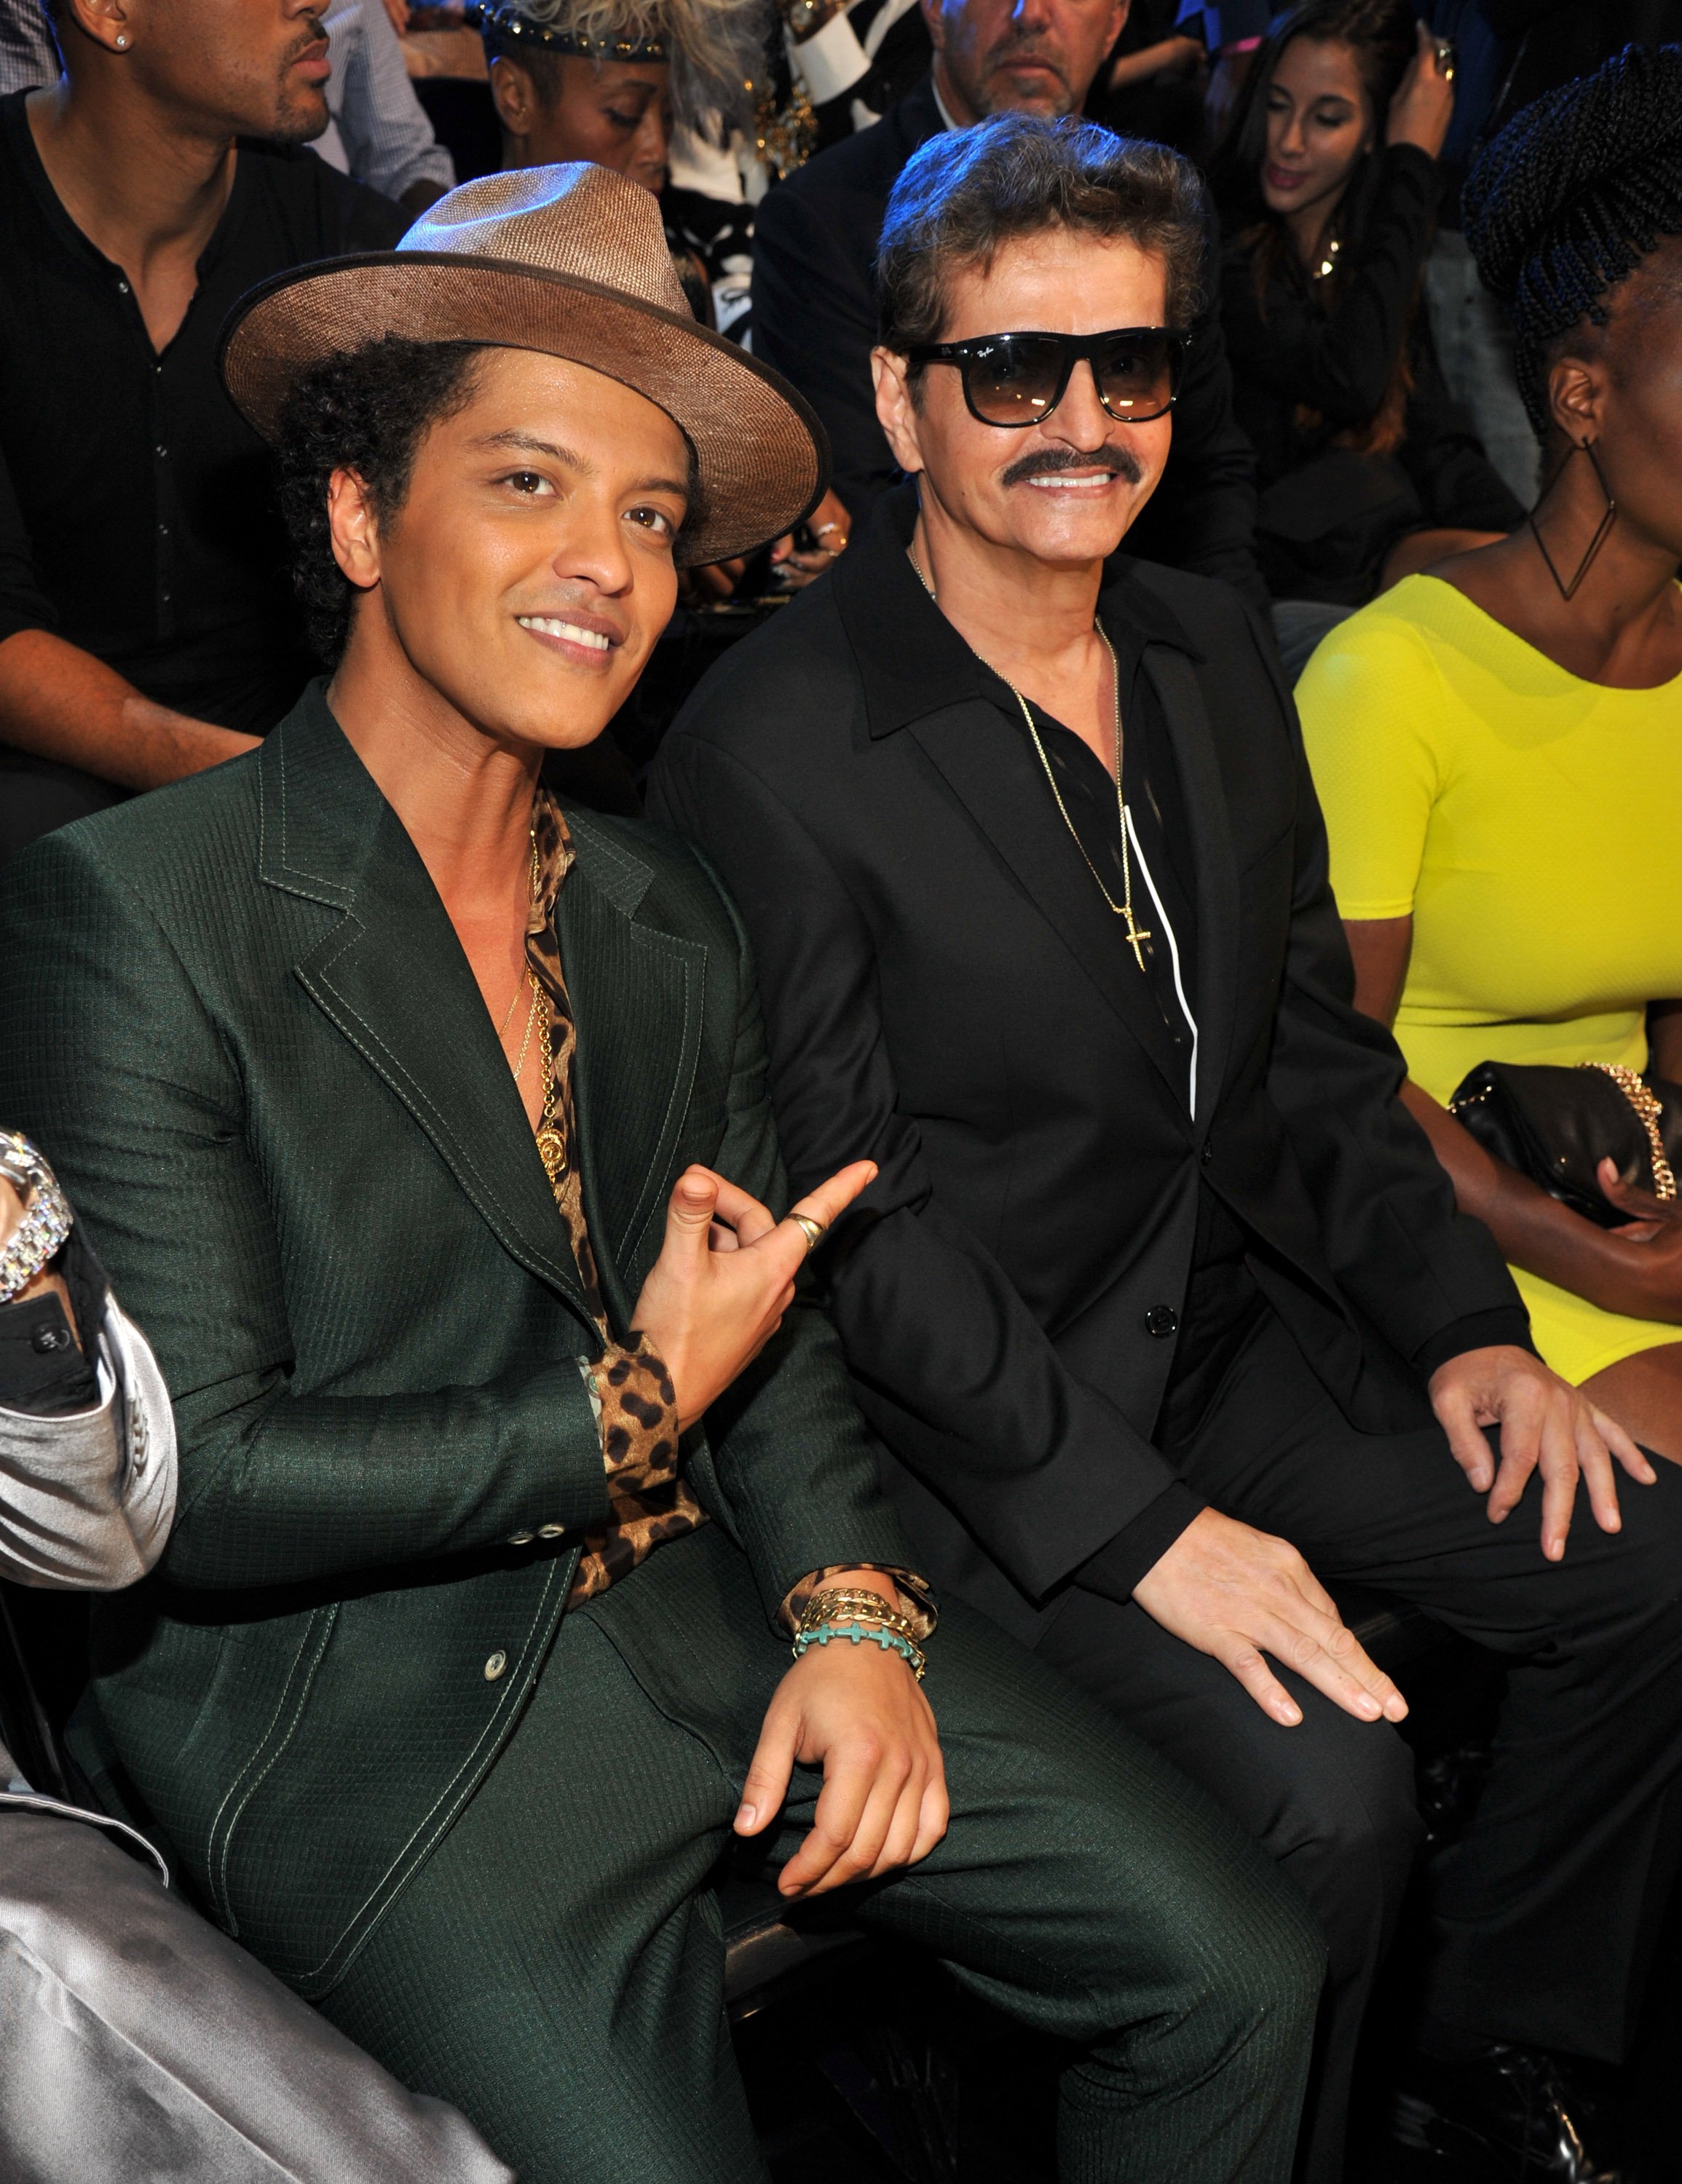 Bruno Mars with his father Peter Hernandez during the 2013 MTV Video Music Awards at the Barclays Center on August 25, 2013 in Brooklyn, New York City. / Source: Getty Images